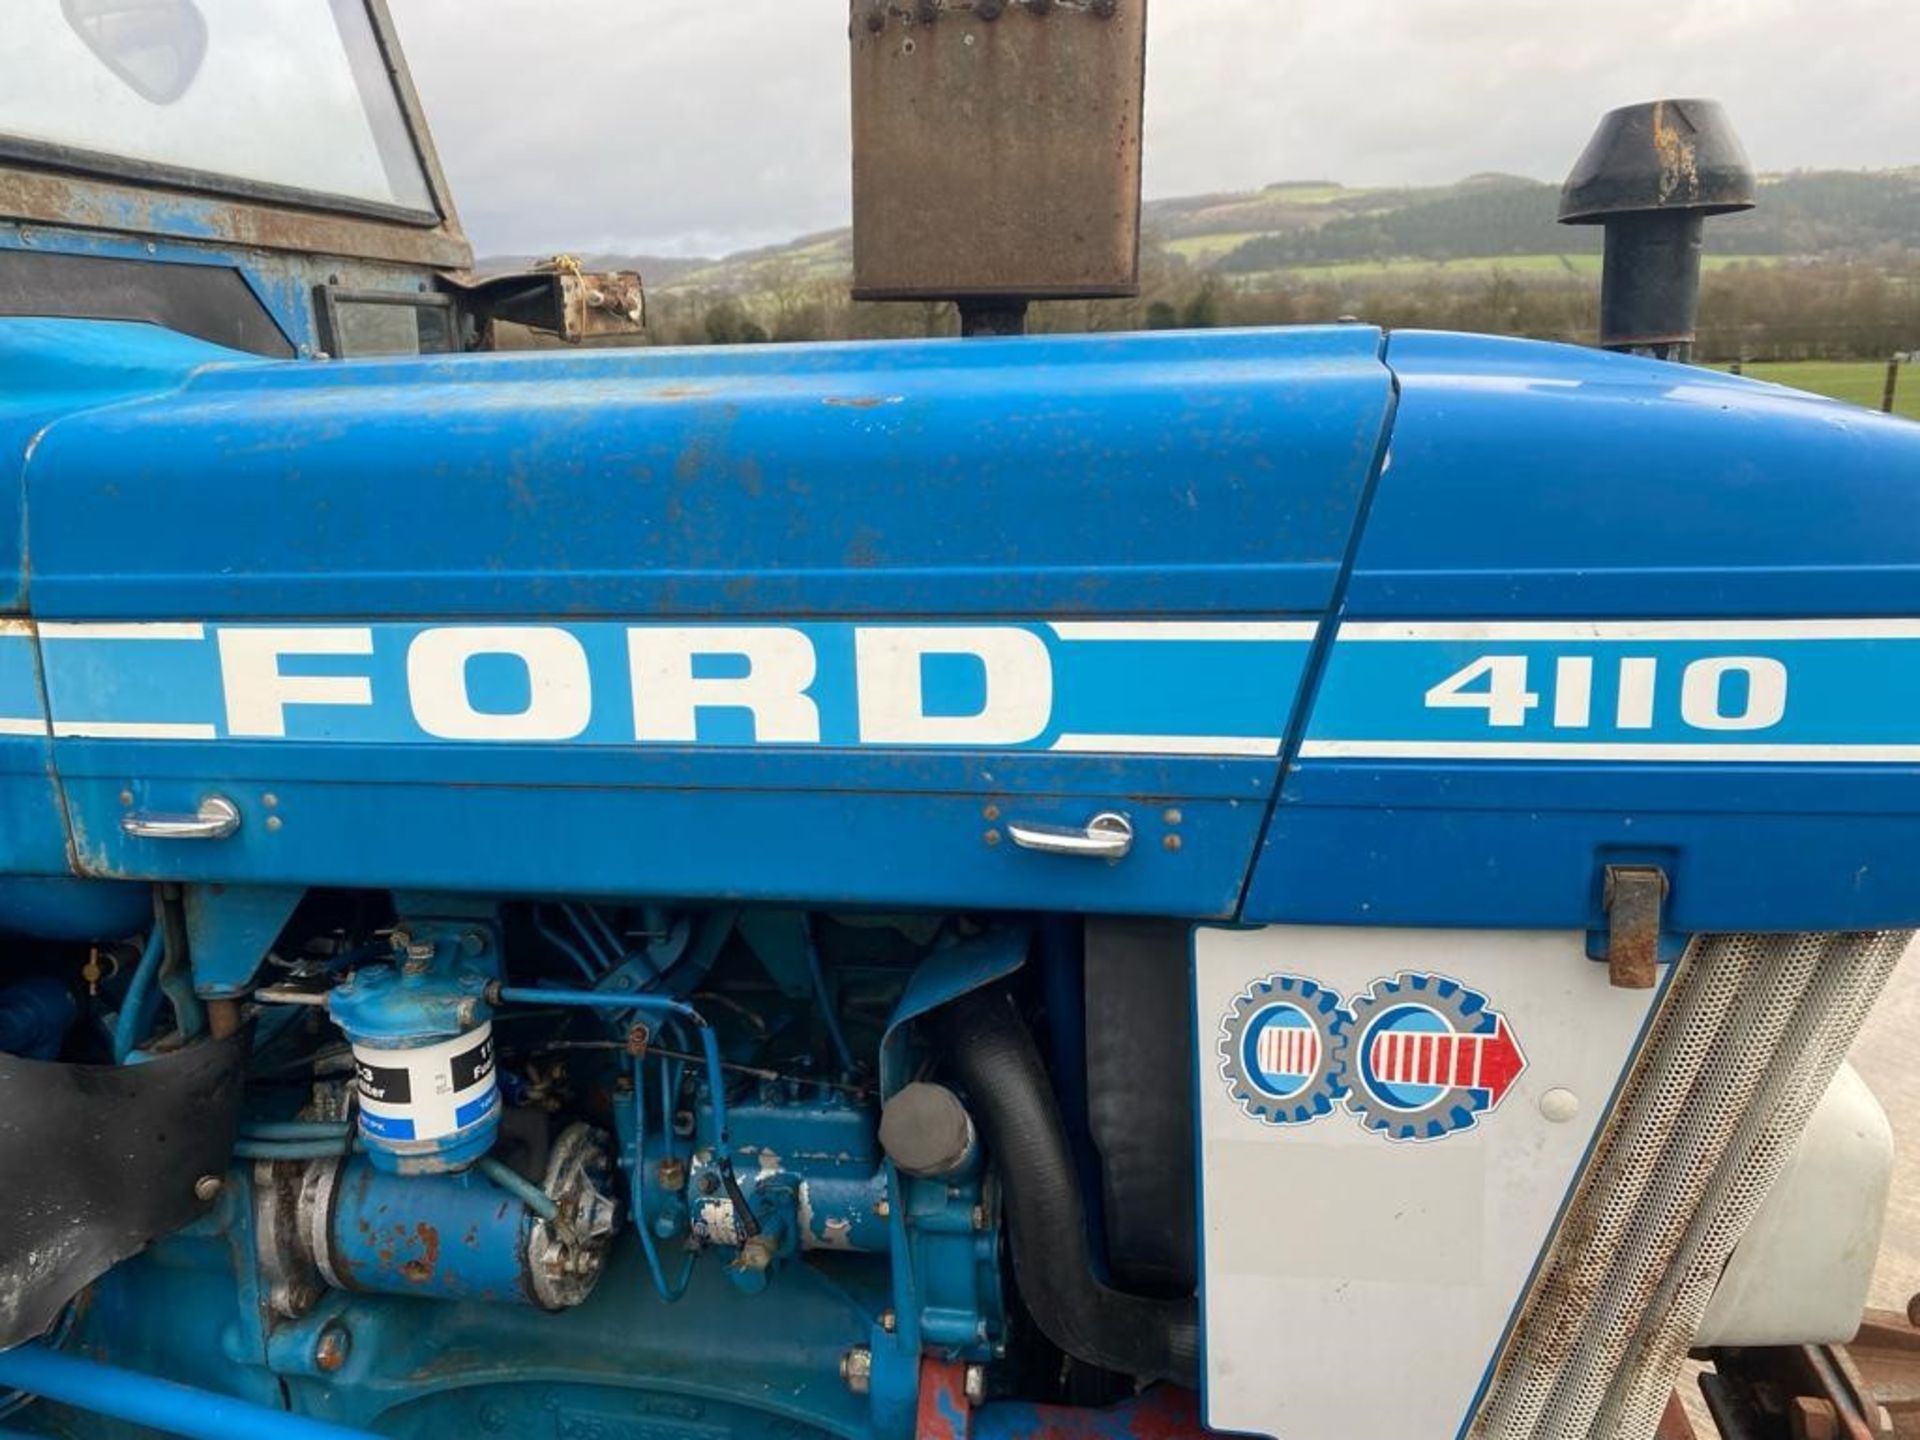 1982 FORD 4110 TRACTOR - Image 18 of 18